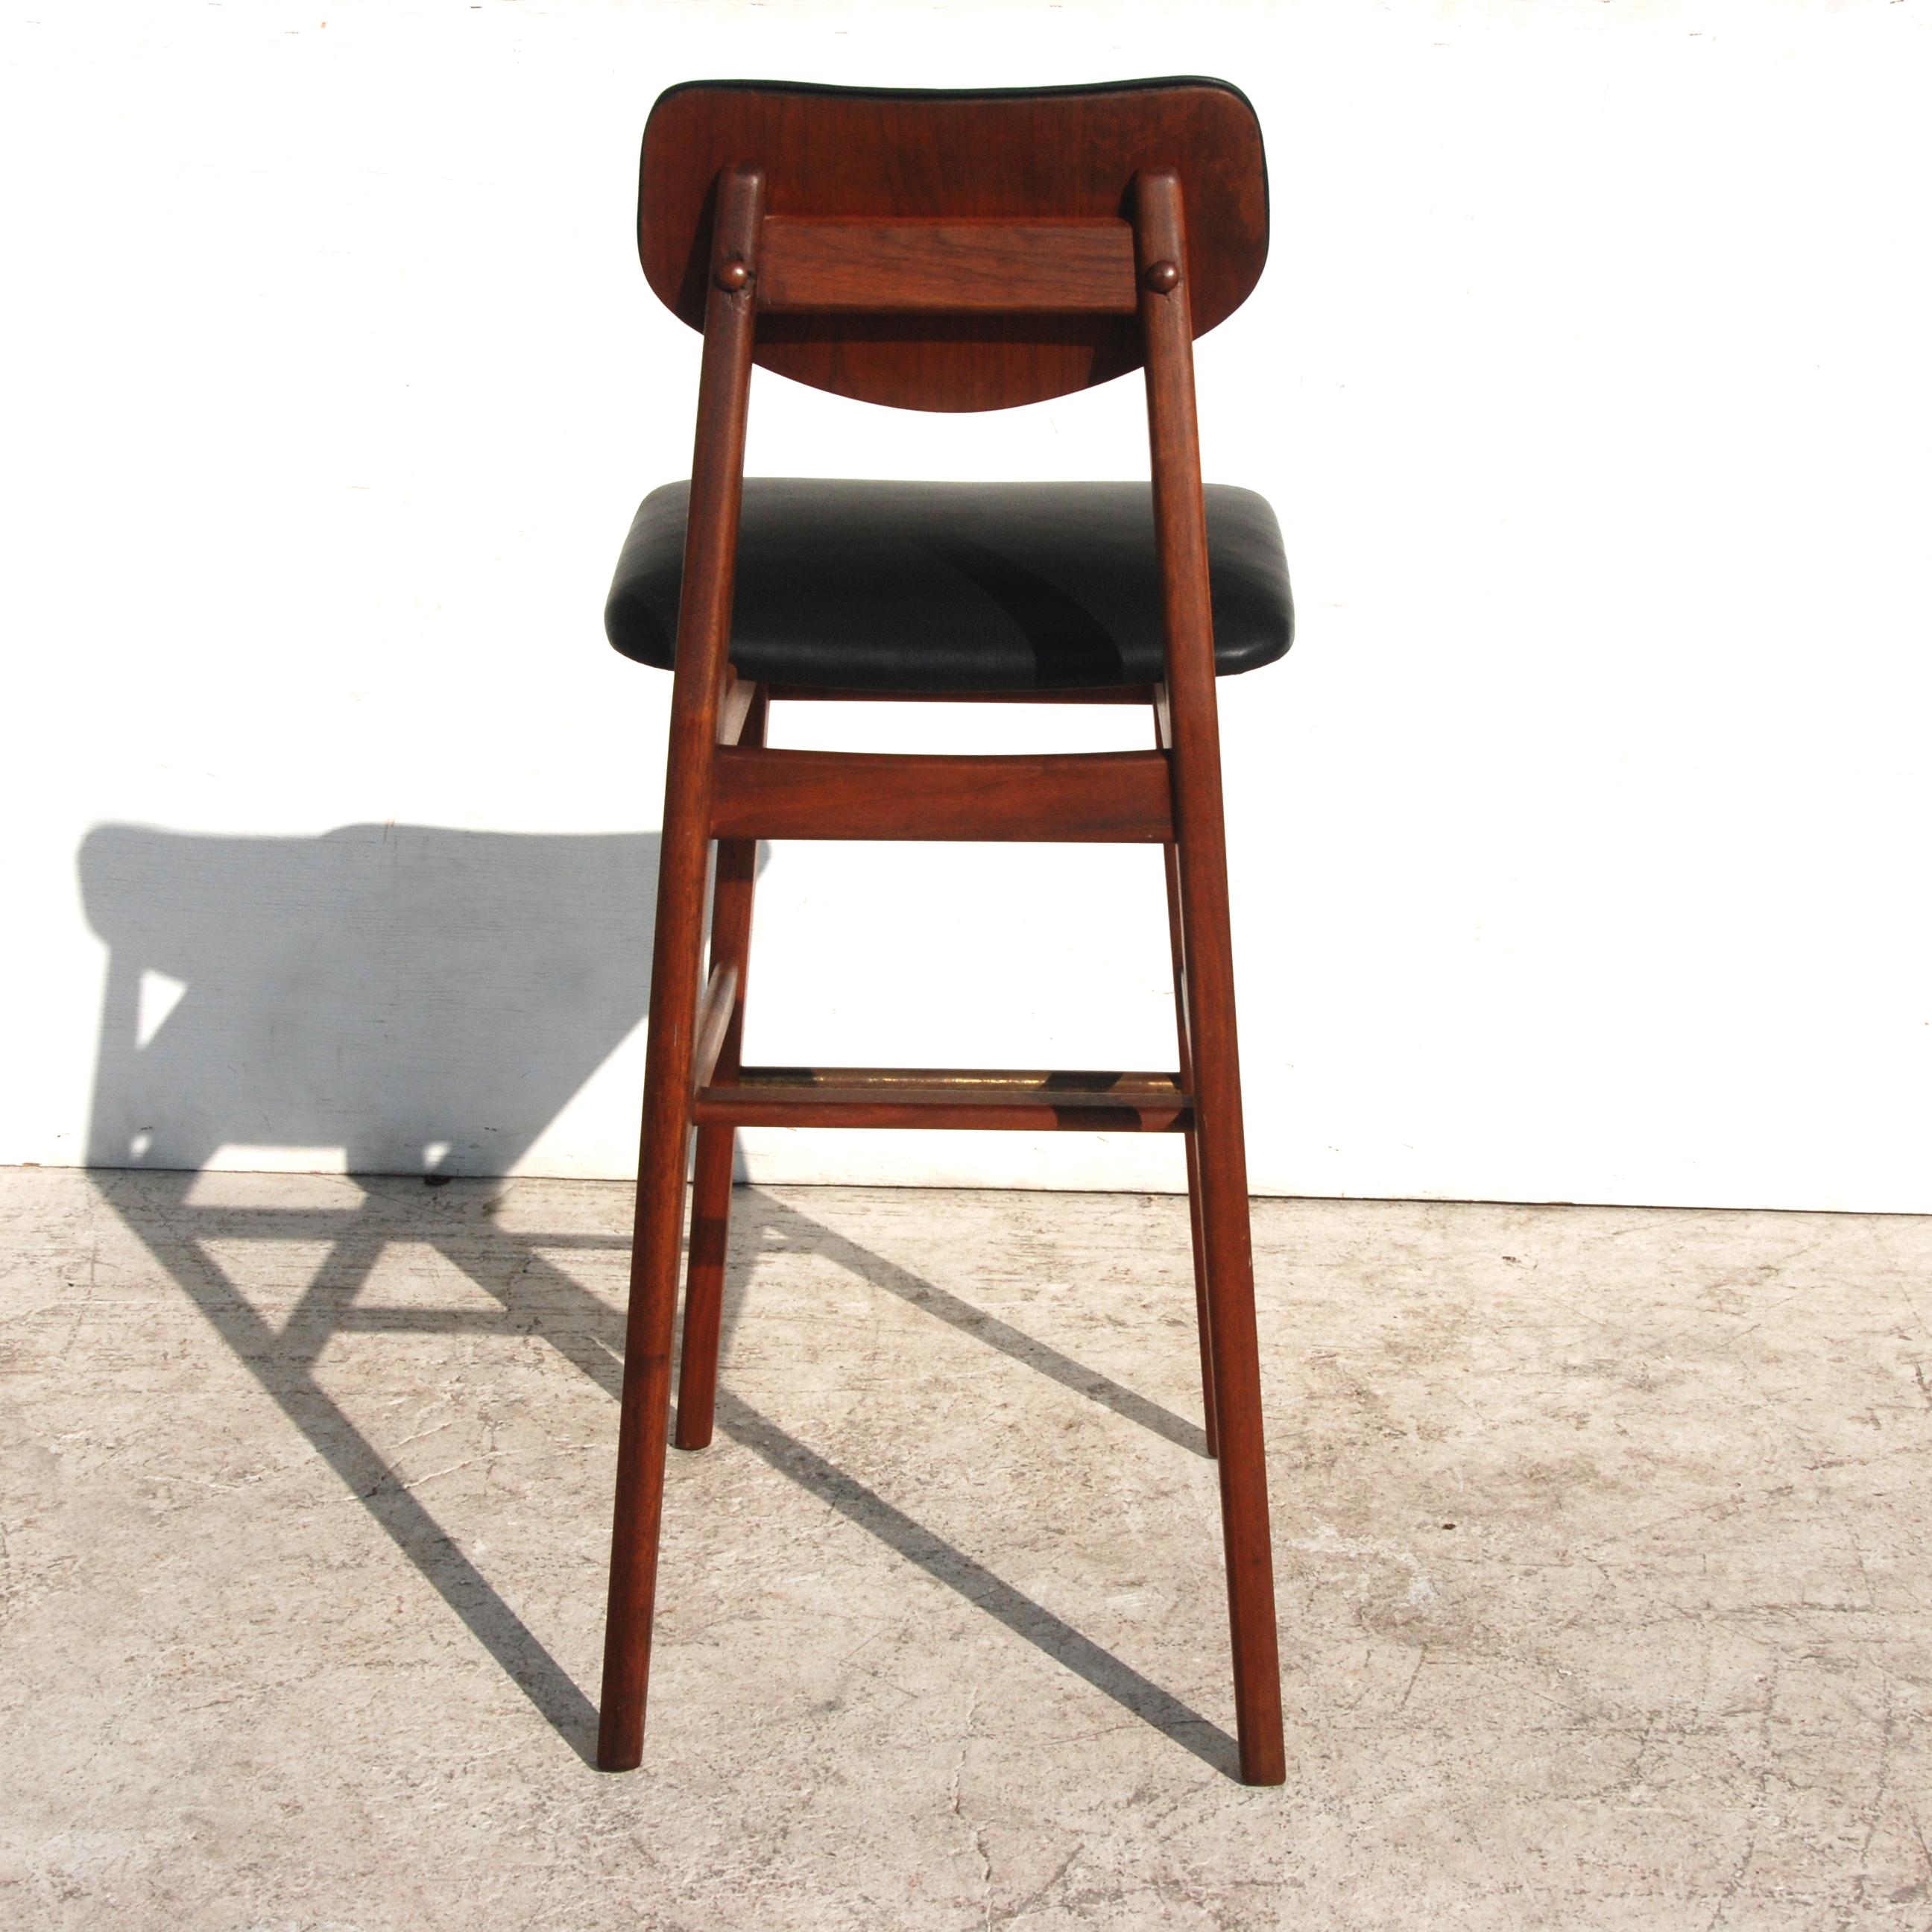 Mid-20th Century Pair of Rare Jens Risom Stools in Leather